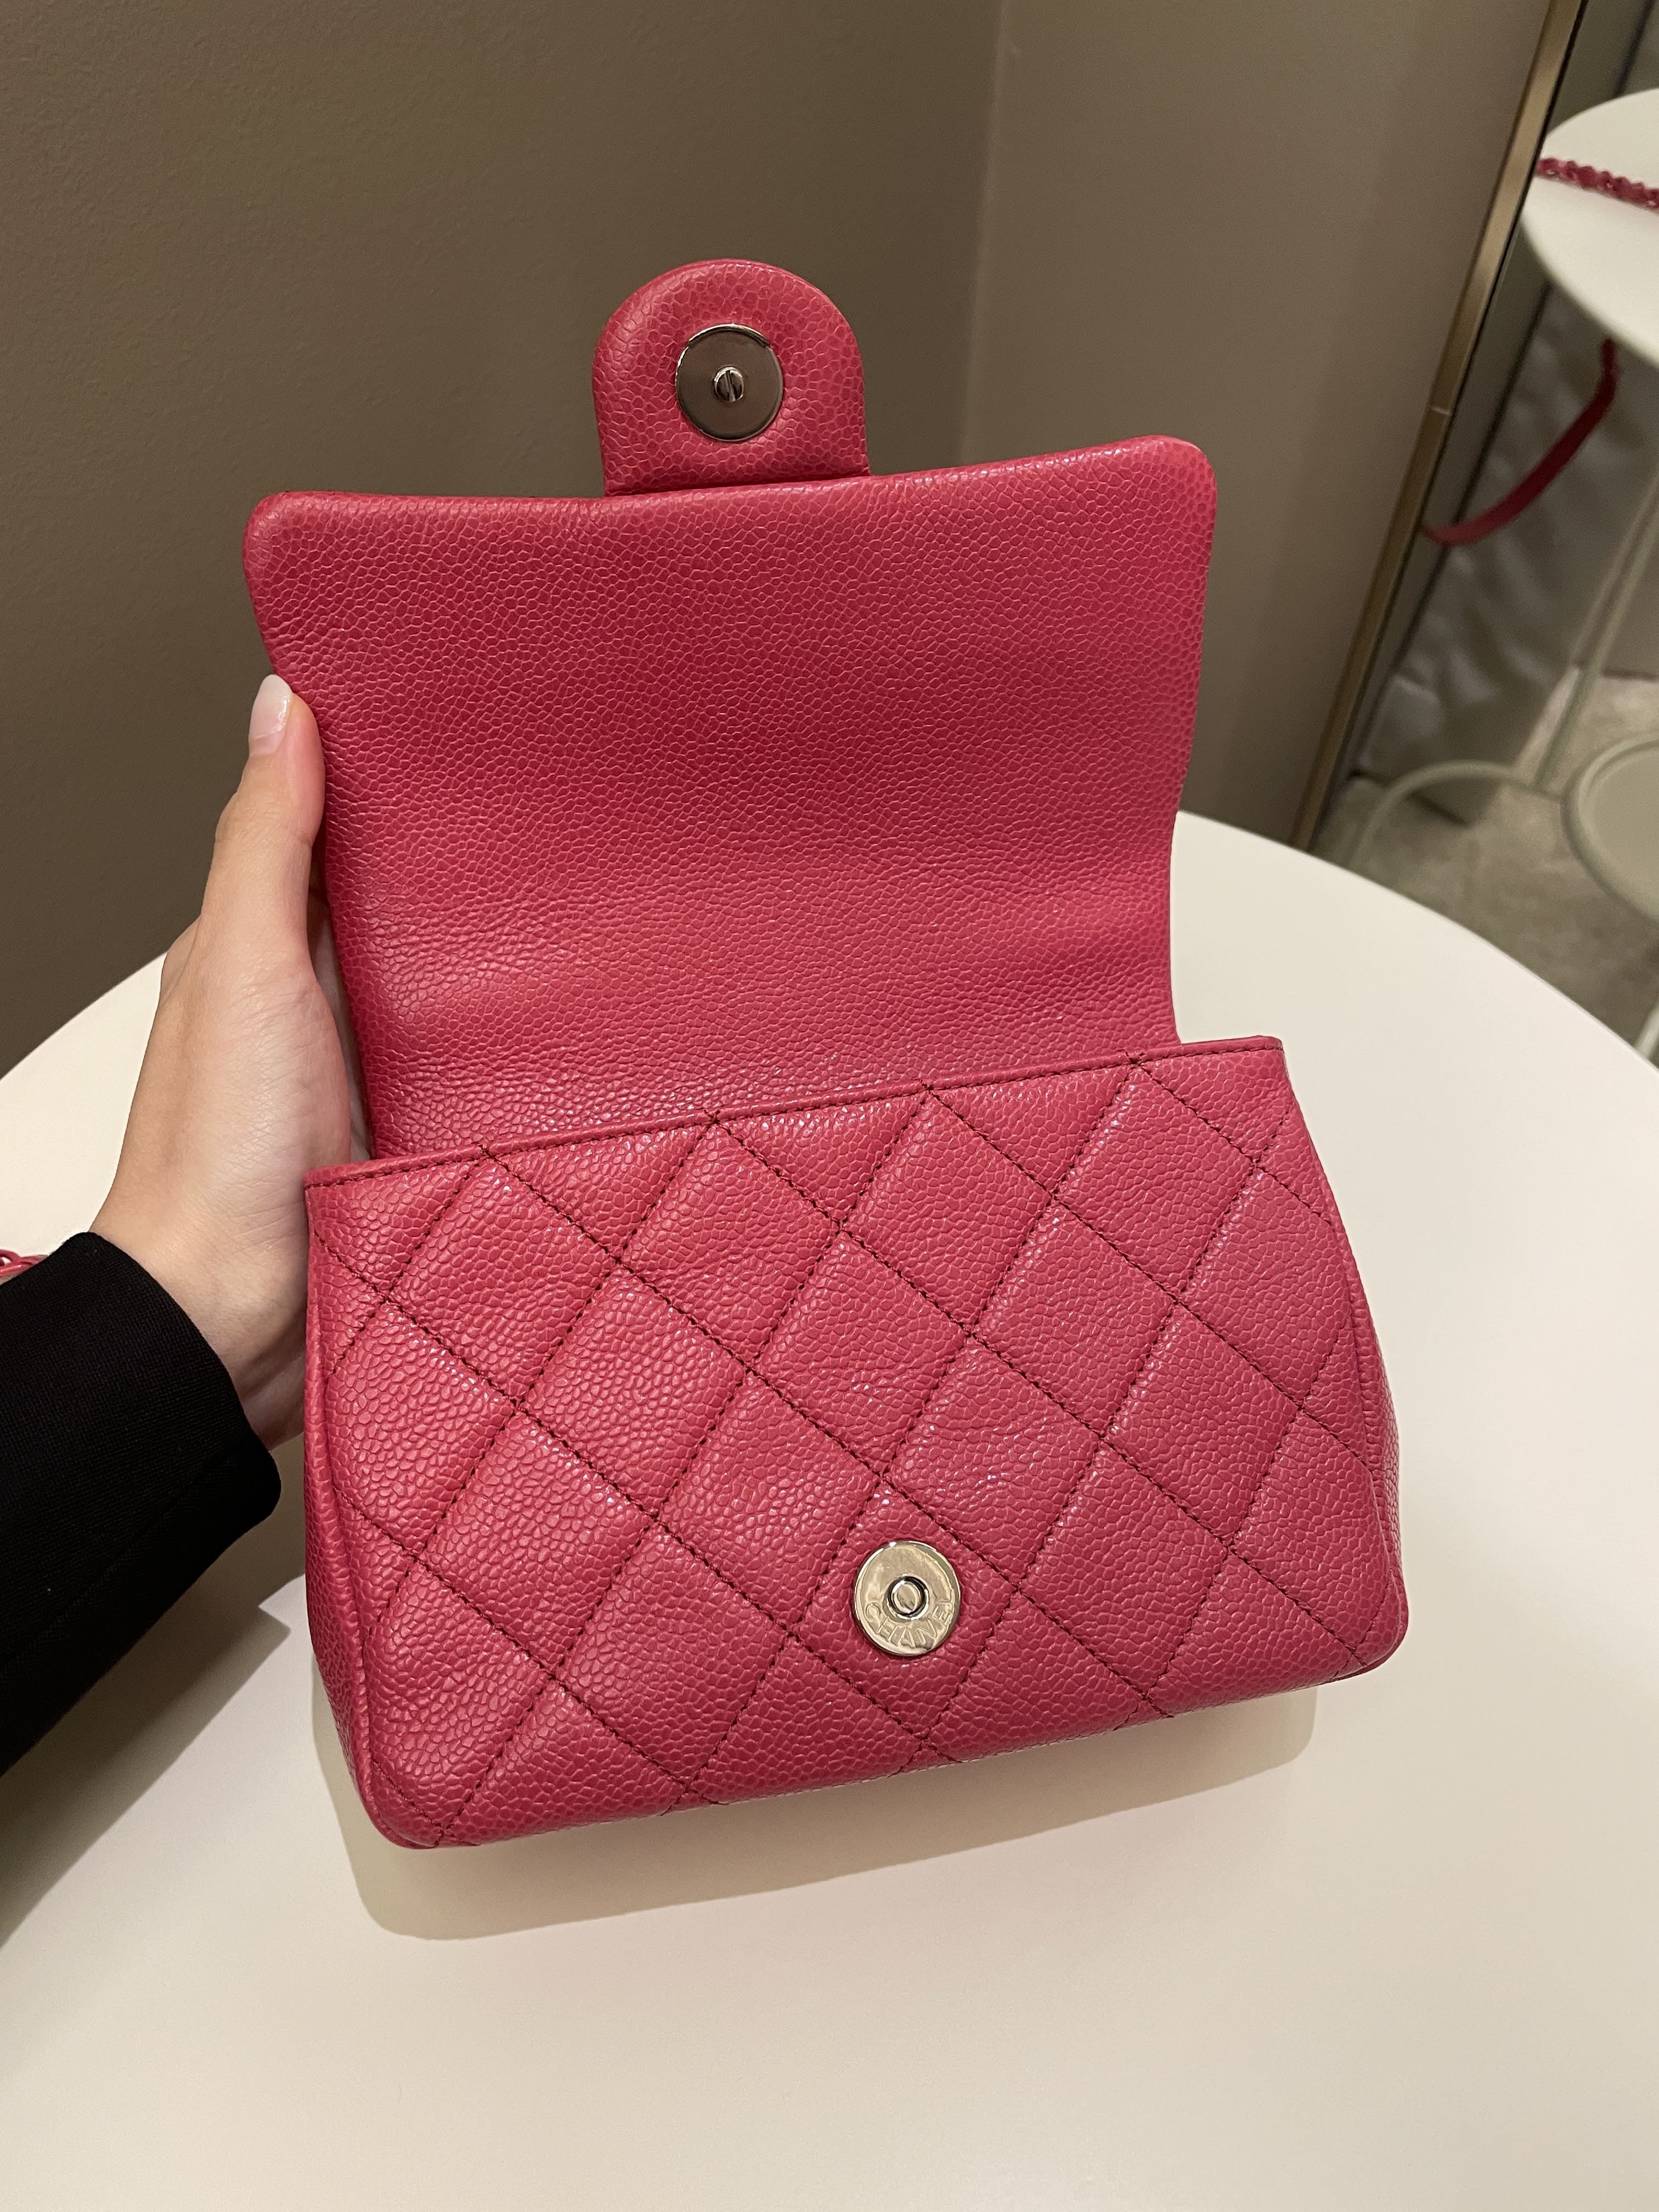 Pink Caviar Quilted Incognito Square Flap Bag